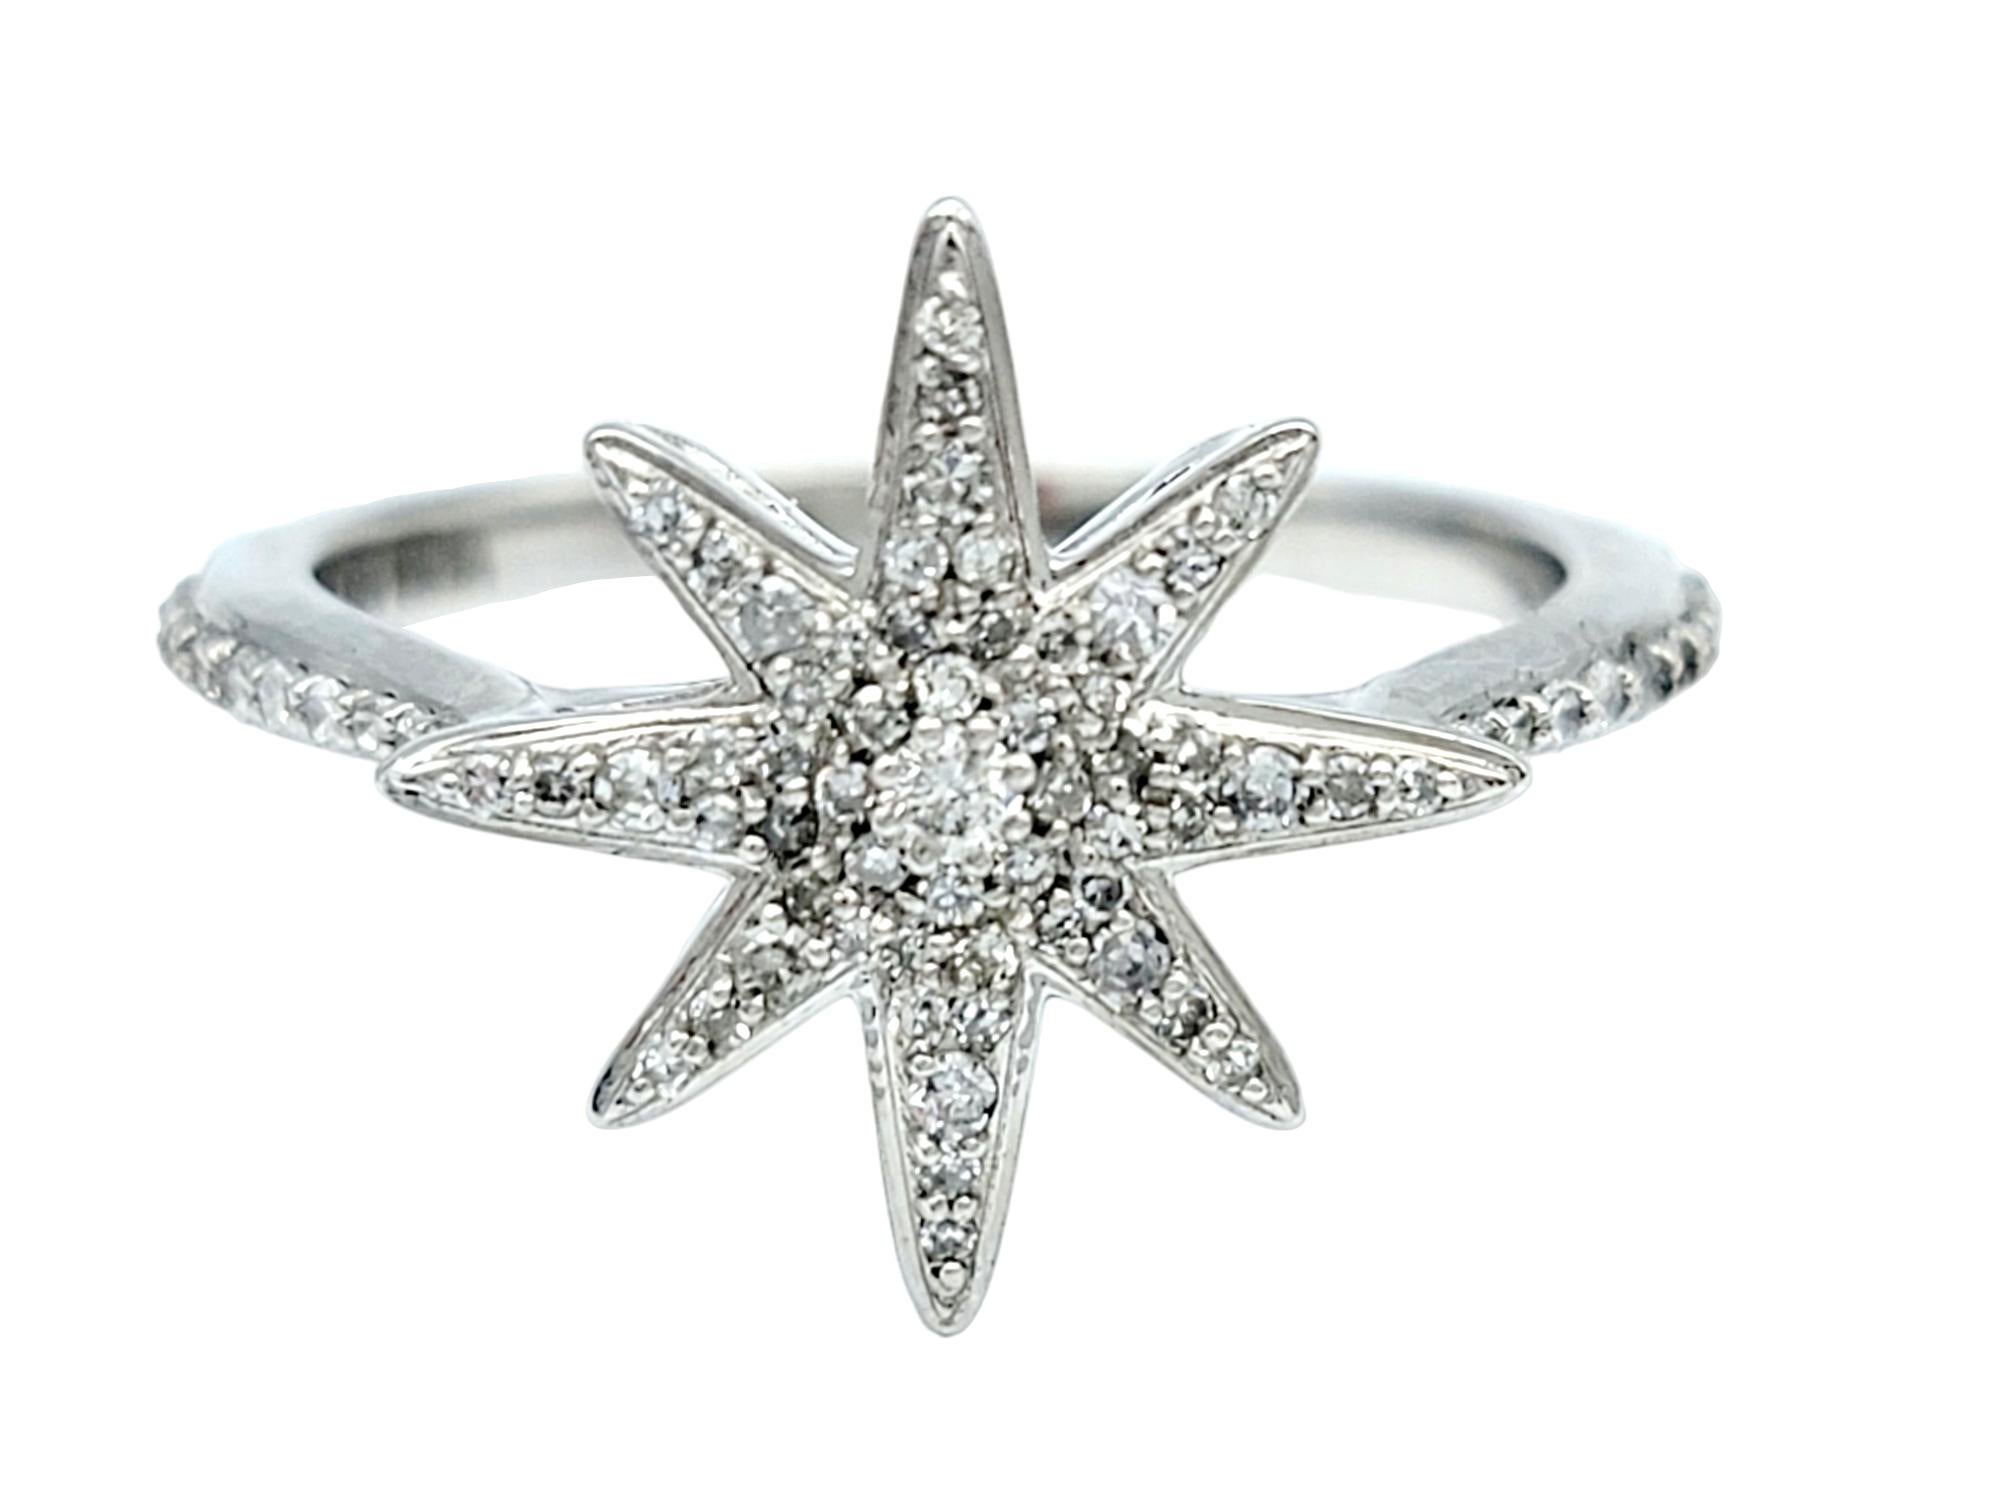 Ring size: 7

This gorgeous 14 karat white gold ring boasts an exquisite design, featuring an captivating 8-point star adorned with pavé-set diamonds. This central motif immediately captures the eye with its intricate brilliance, emanating a